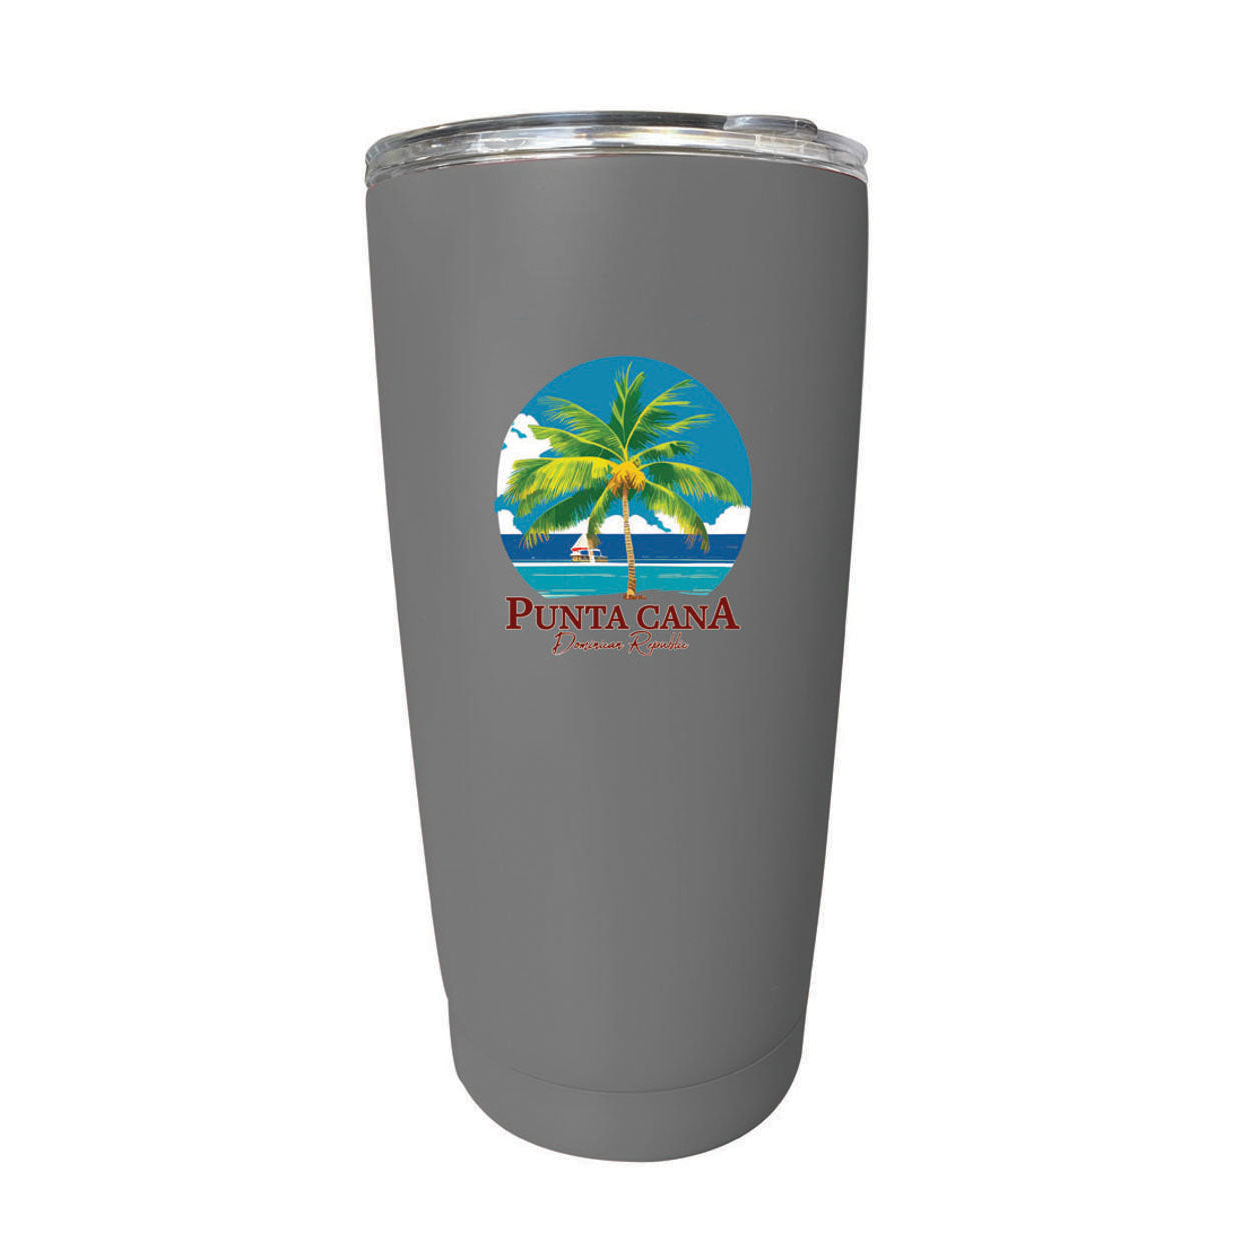 Punta Cana Dominican Republic Souvenir 16 Oz Stainless Steel Insulated Tumbler - White, PARROT B